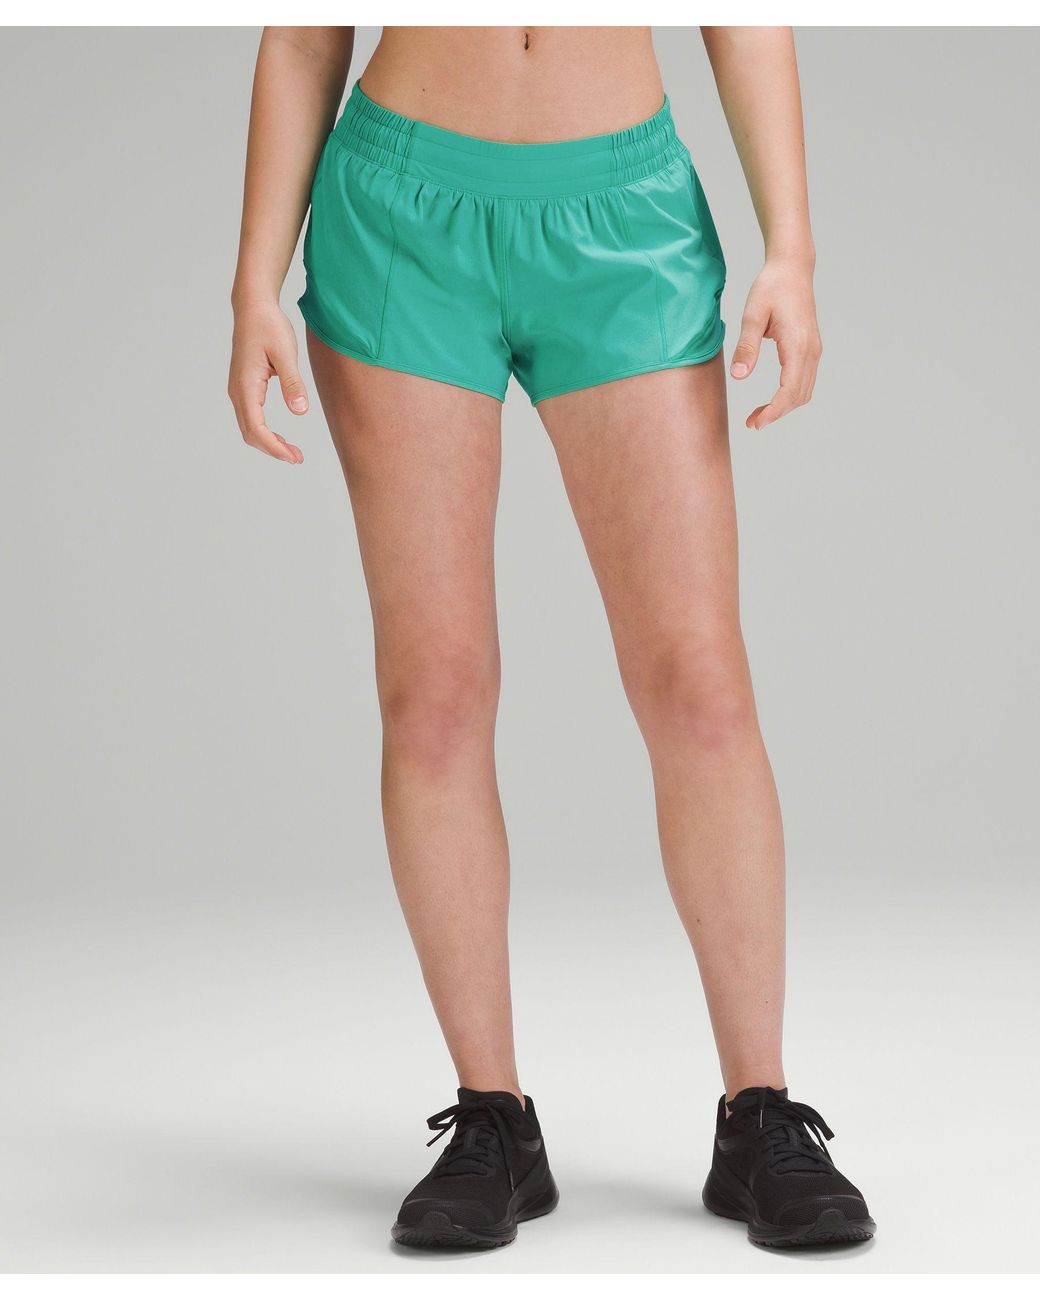 lululemon athletica Hotty Hot Low-rise Lined Shorts - 2.5 - Color Green -  Size 14